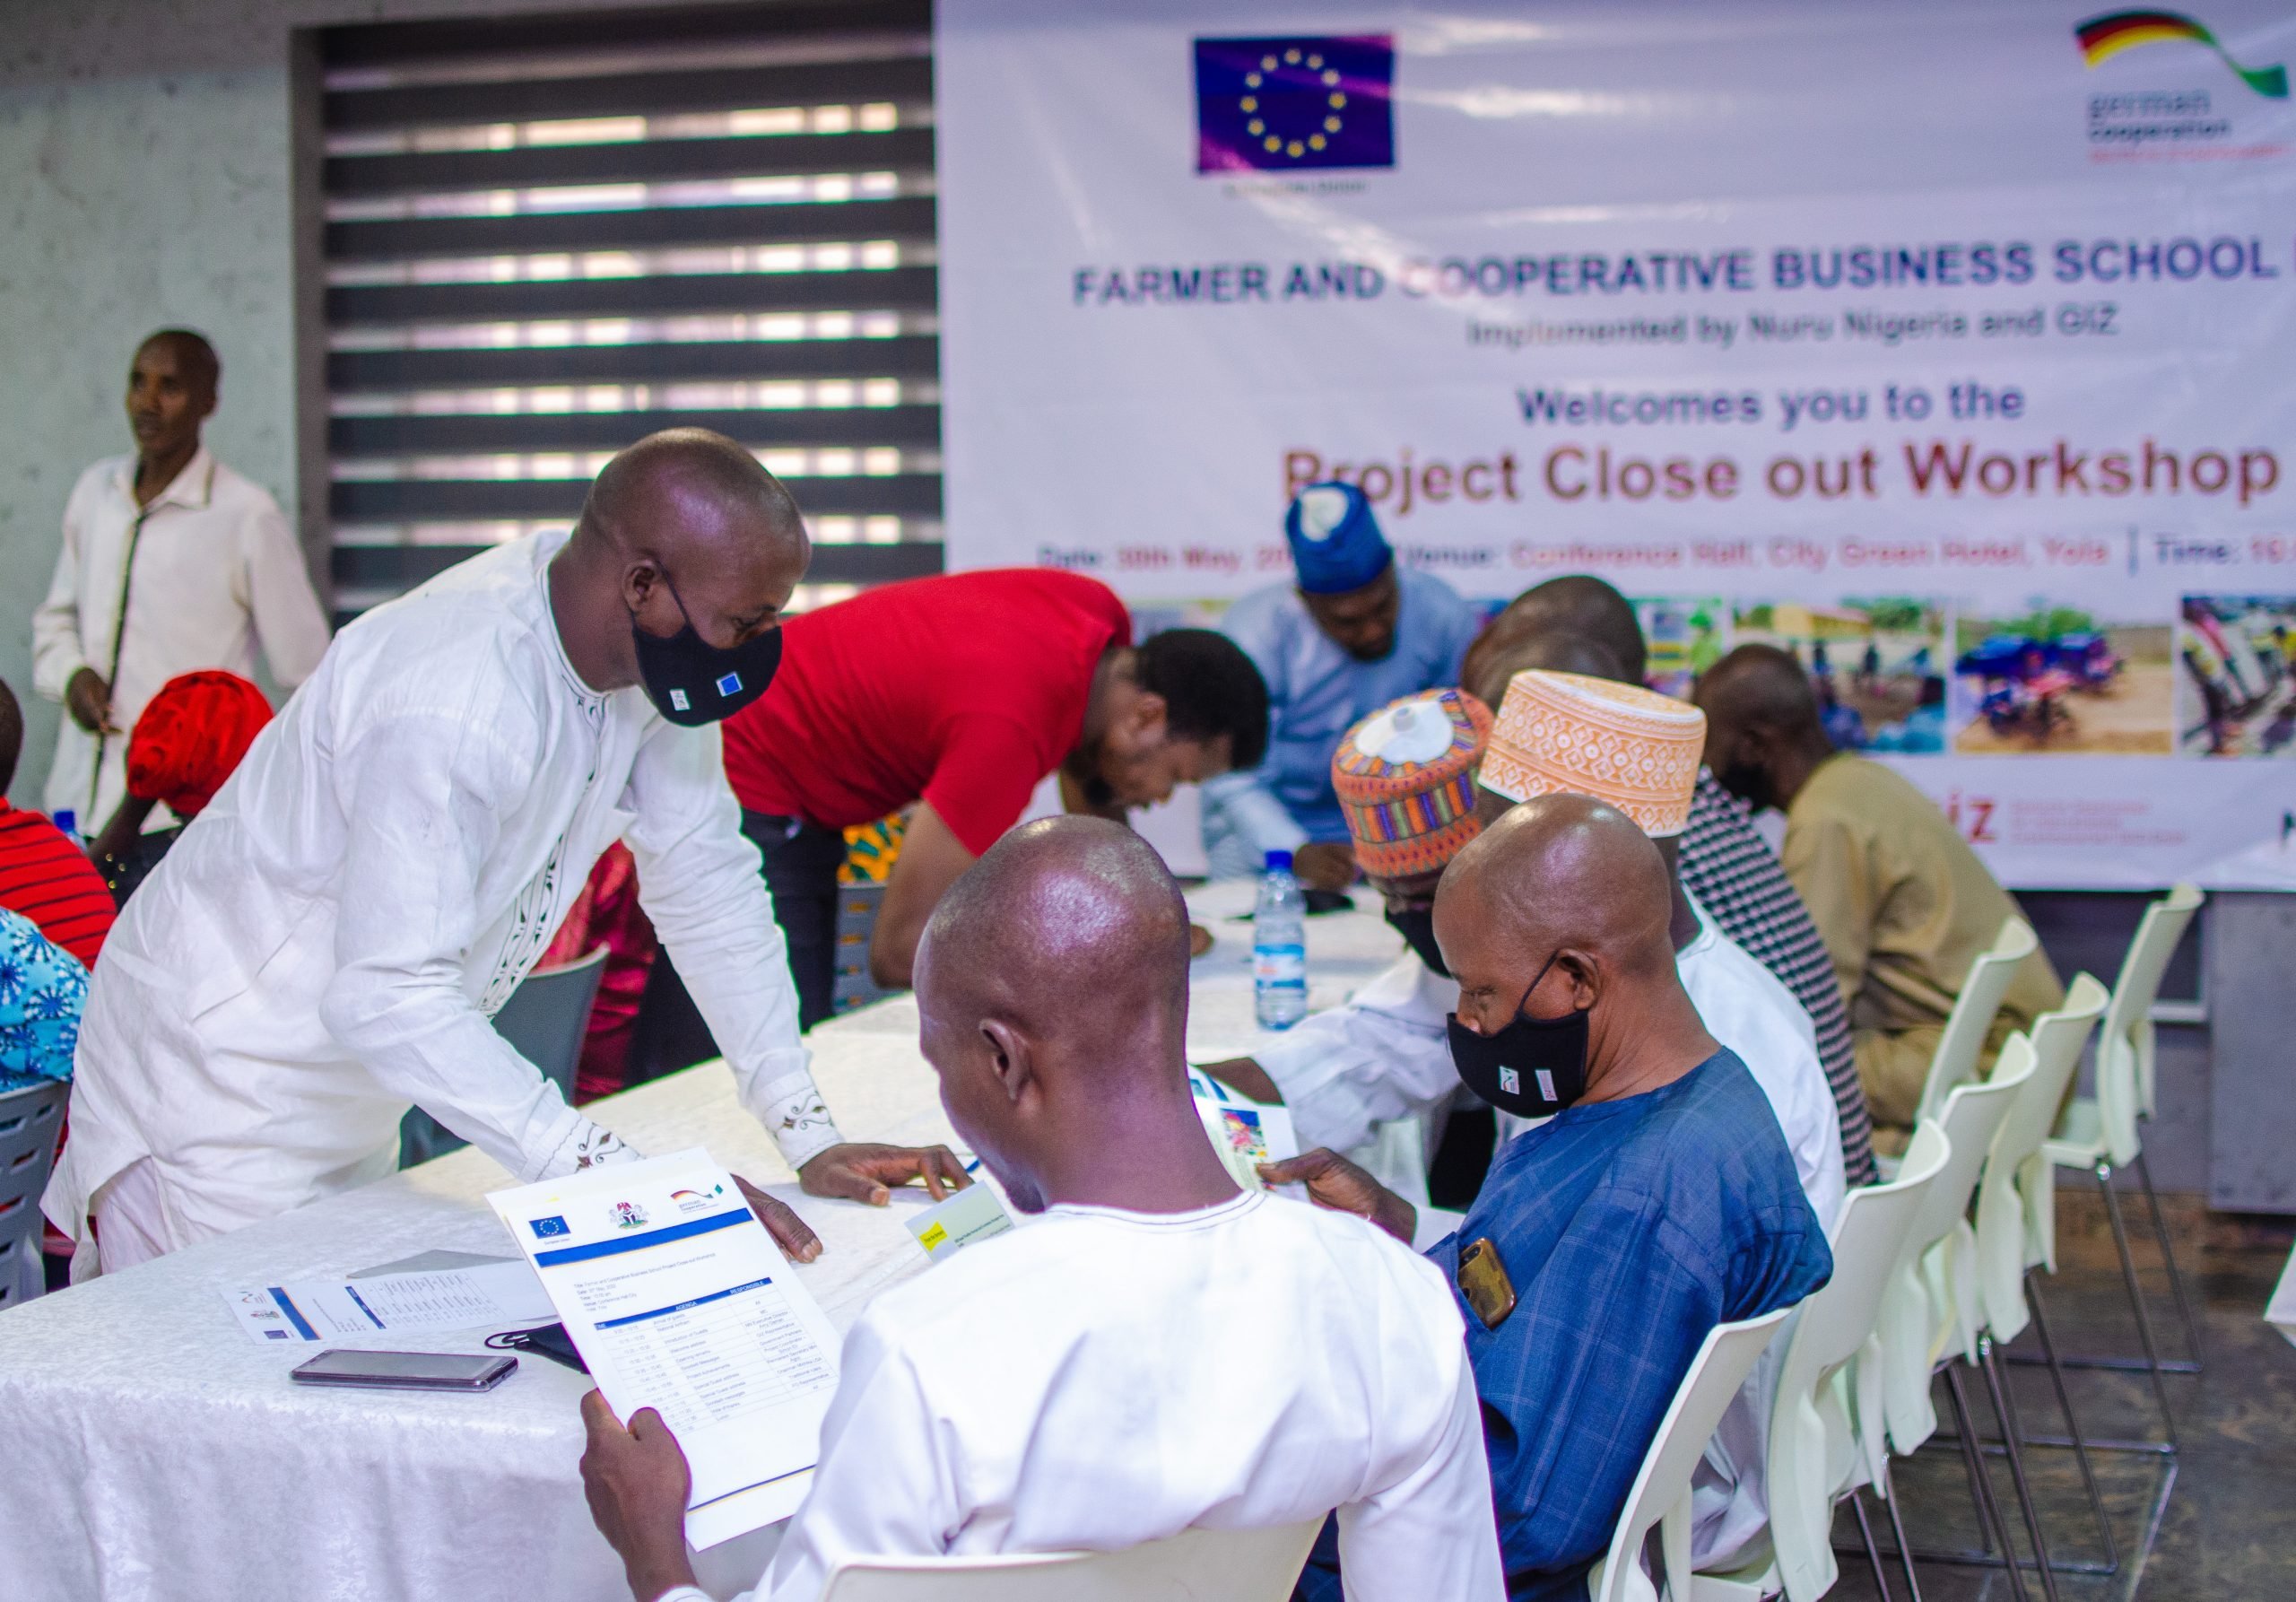 Group of men, primarily in traditional Nigerian dress, sit and stand around a table and look at event materials. Sign in the background reads "Farmer and Cooperative Business School Project, Implemented by Nuru Nigeria and GIZ, Welcomes you to the Project Close out Workshop"